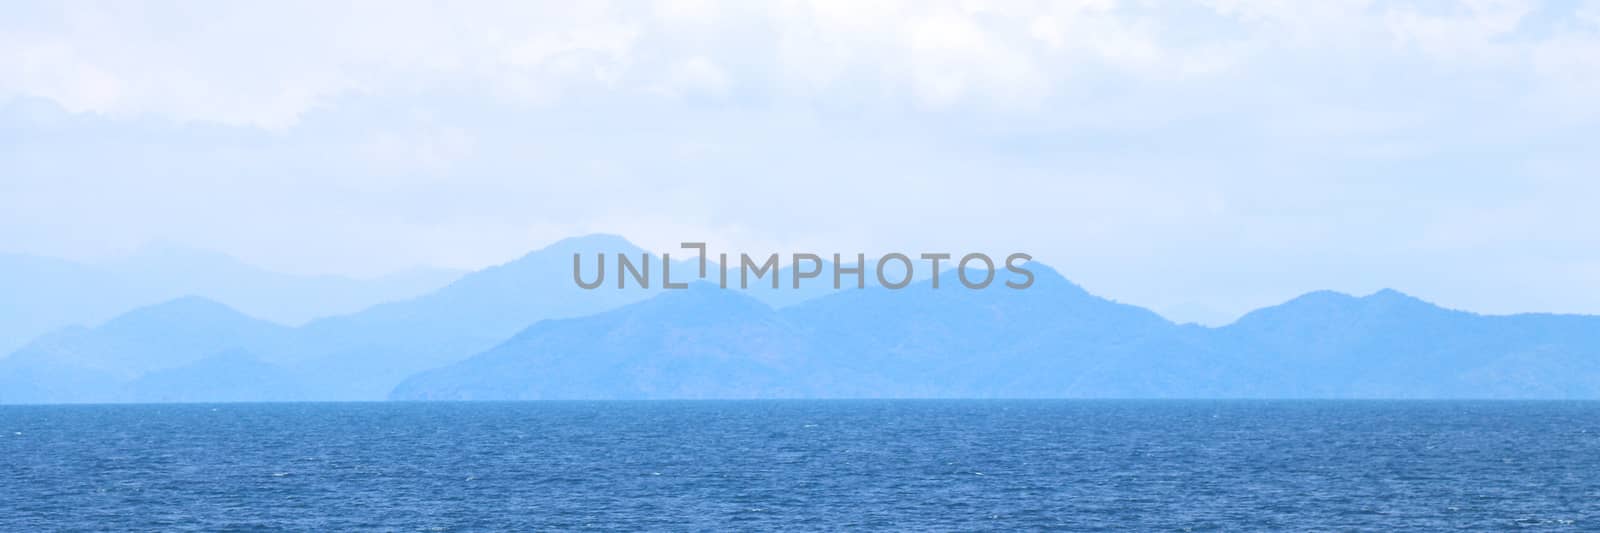 Blue sea with mountains and sky banner background. by Eungsuwat